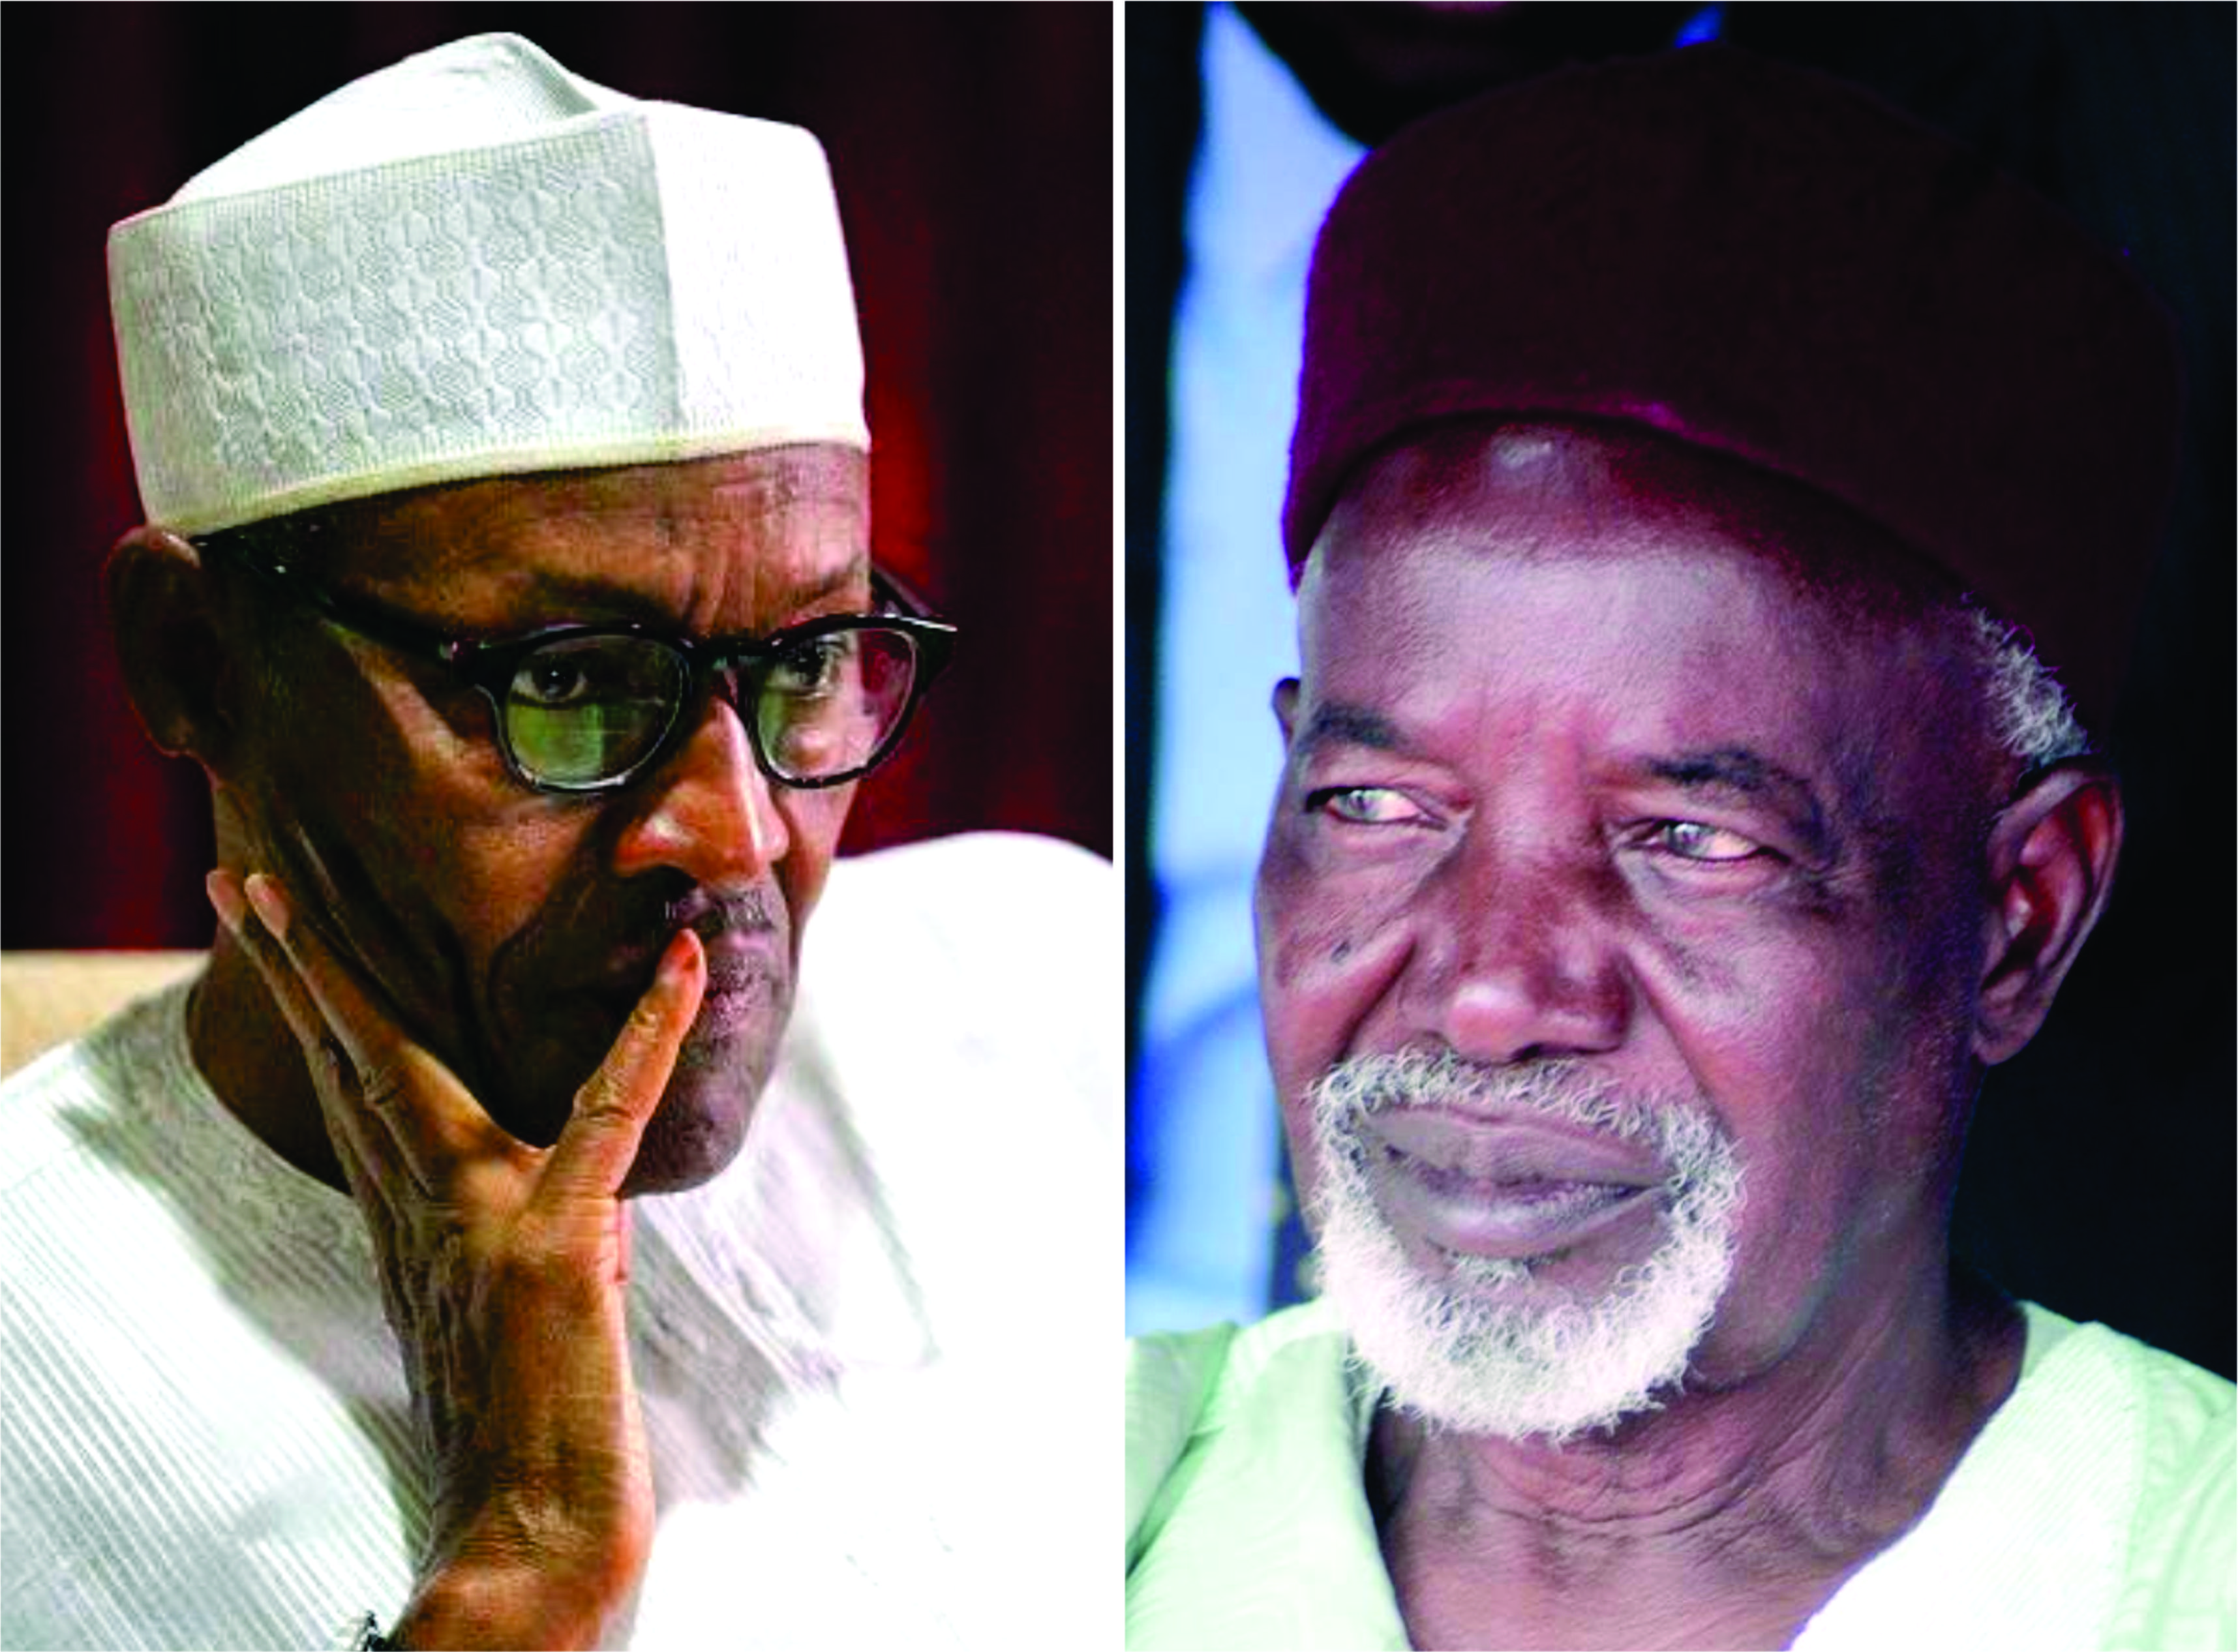  "Buhari is a Complete Failure, He Needs to be Impeached" - Balarabe Musa